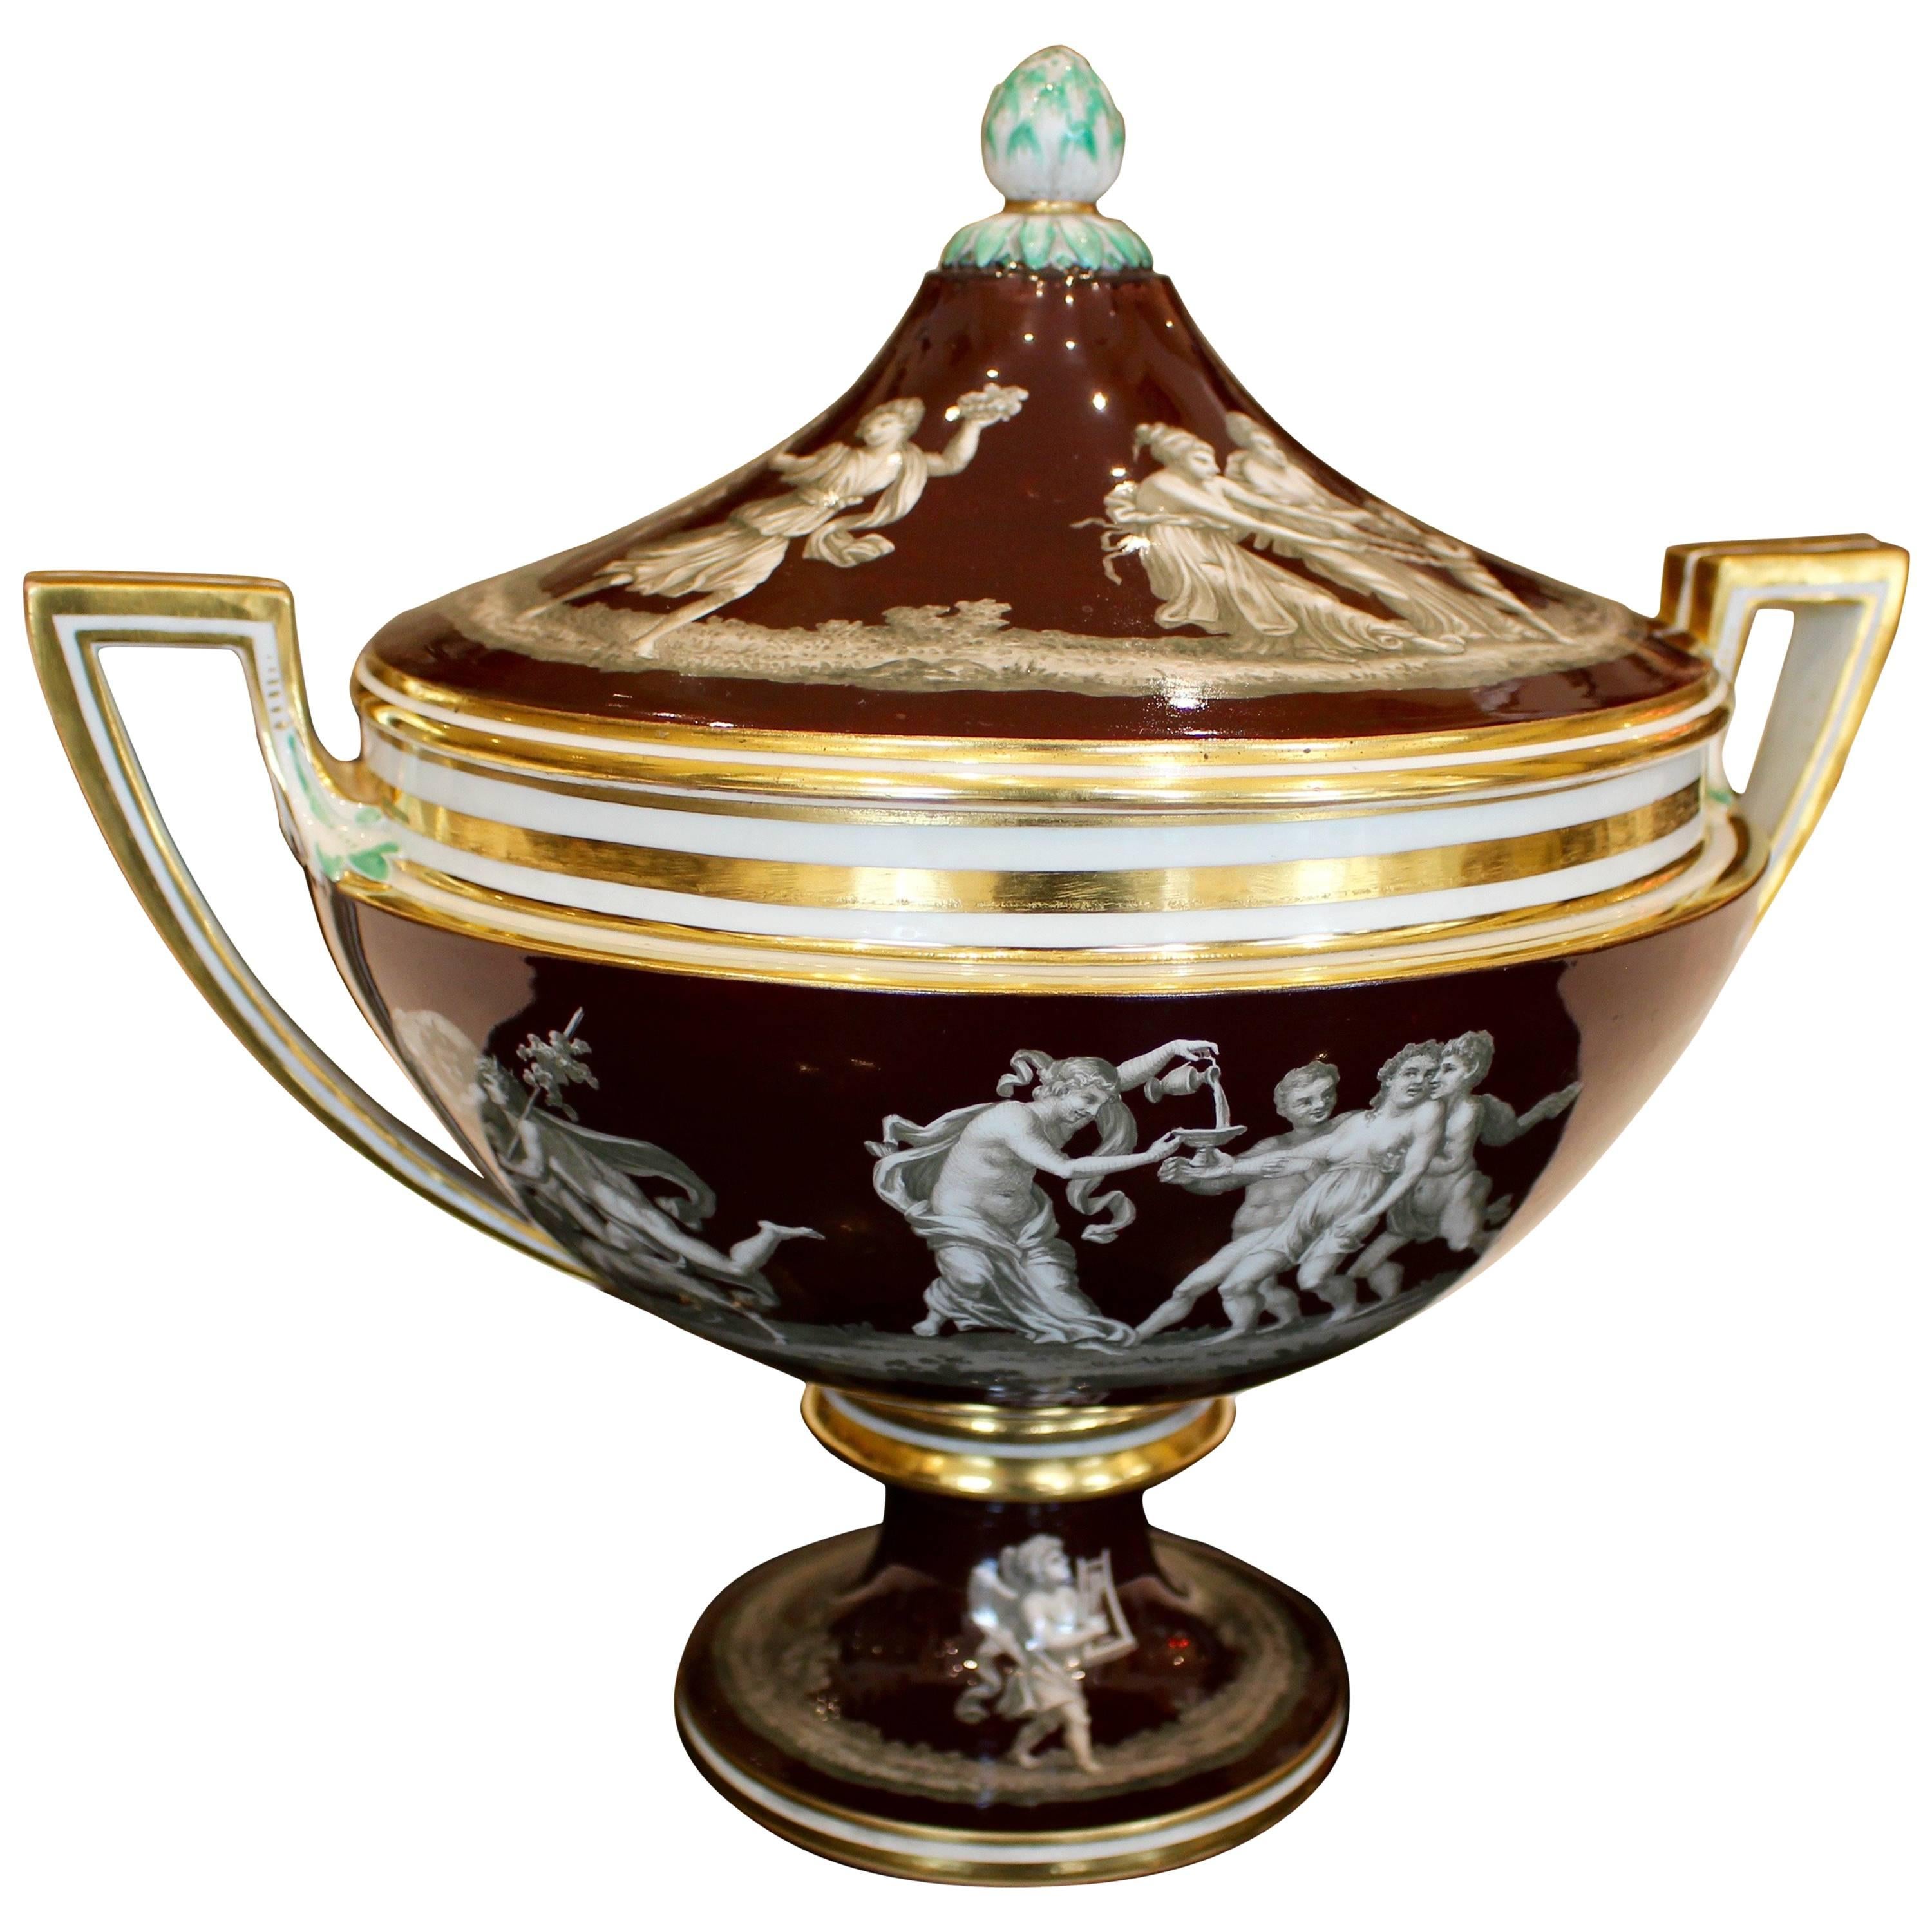 Continental Covered Soup Tureen in Neoclassical Style with Bacchic Decoration